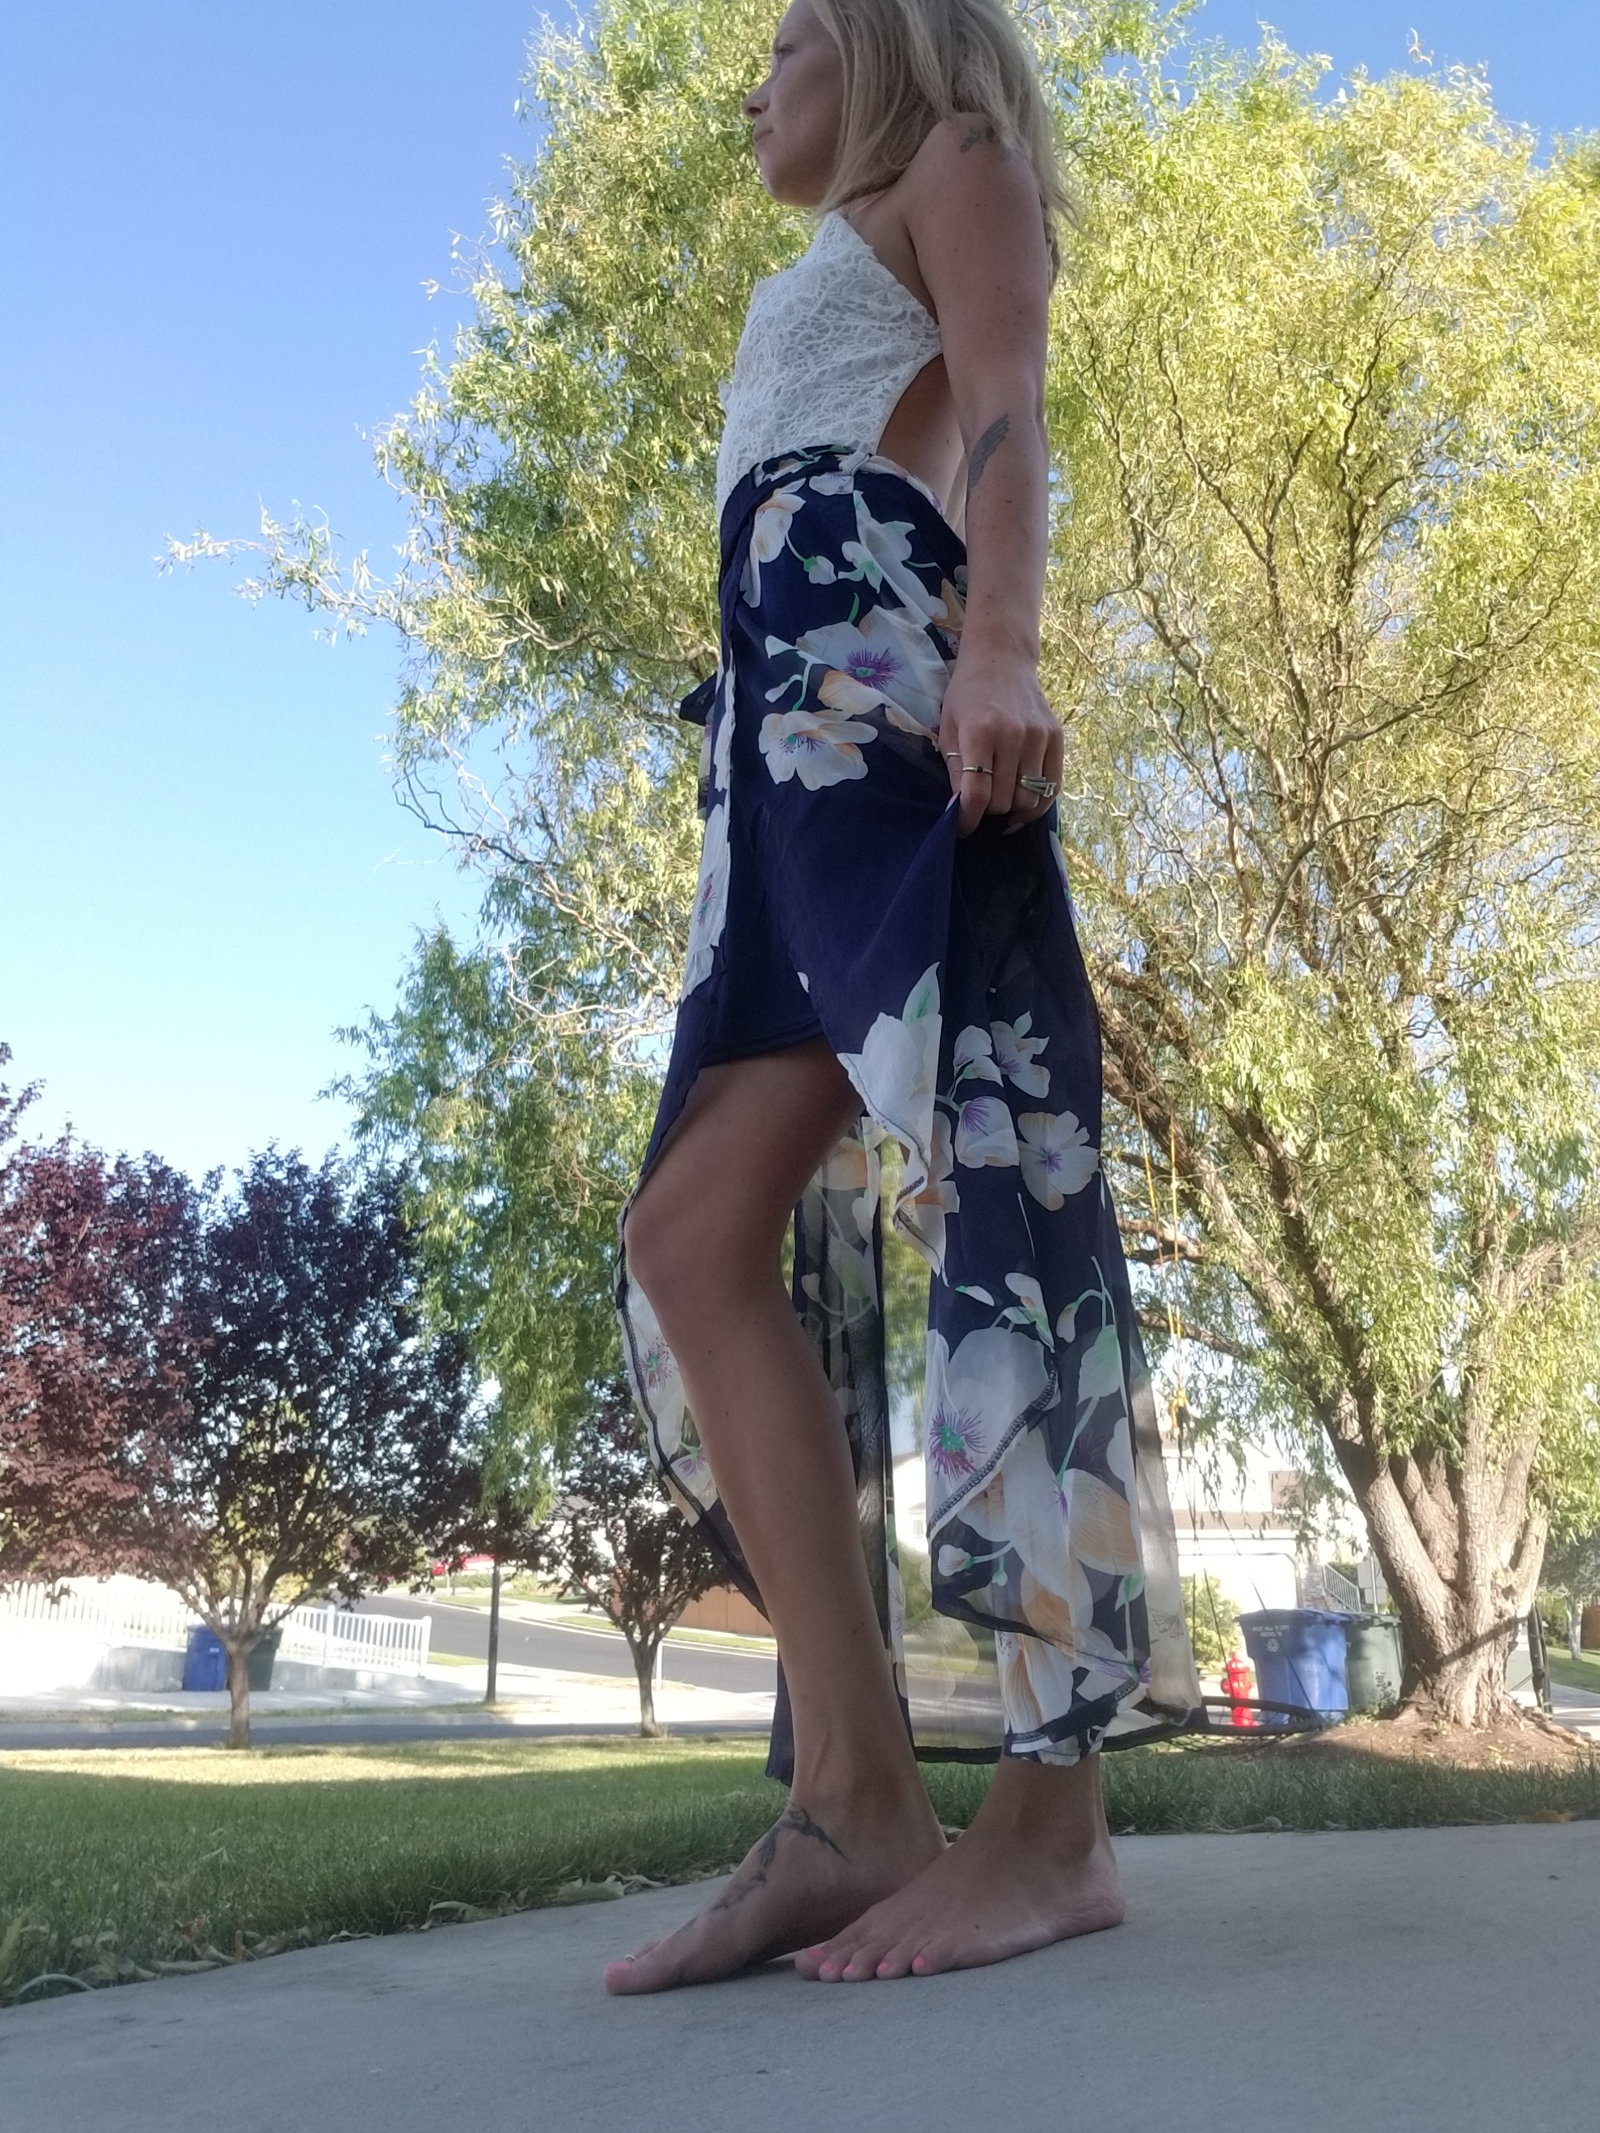 Photo by PetiteBlondeMilf with the username @Petiteblondemilf, who is a star user,  July 19, 2018 at 7:52 PM. The post is about the topic Foot Fetish and the text says 'Barefoot or heels?'